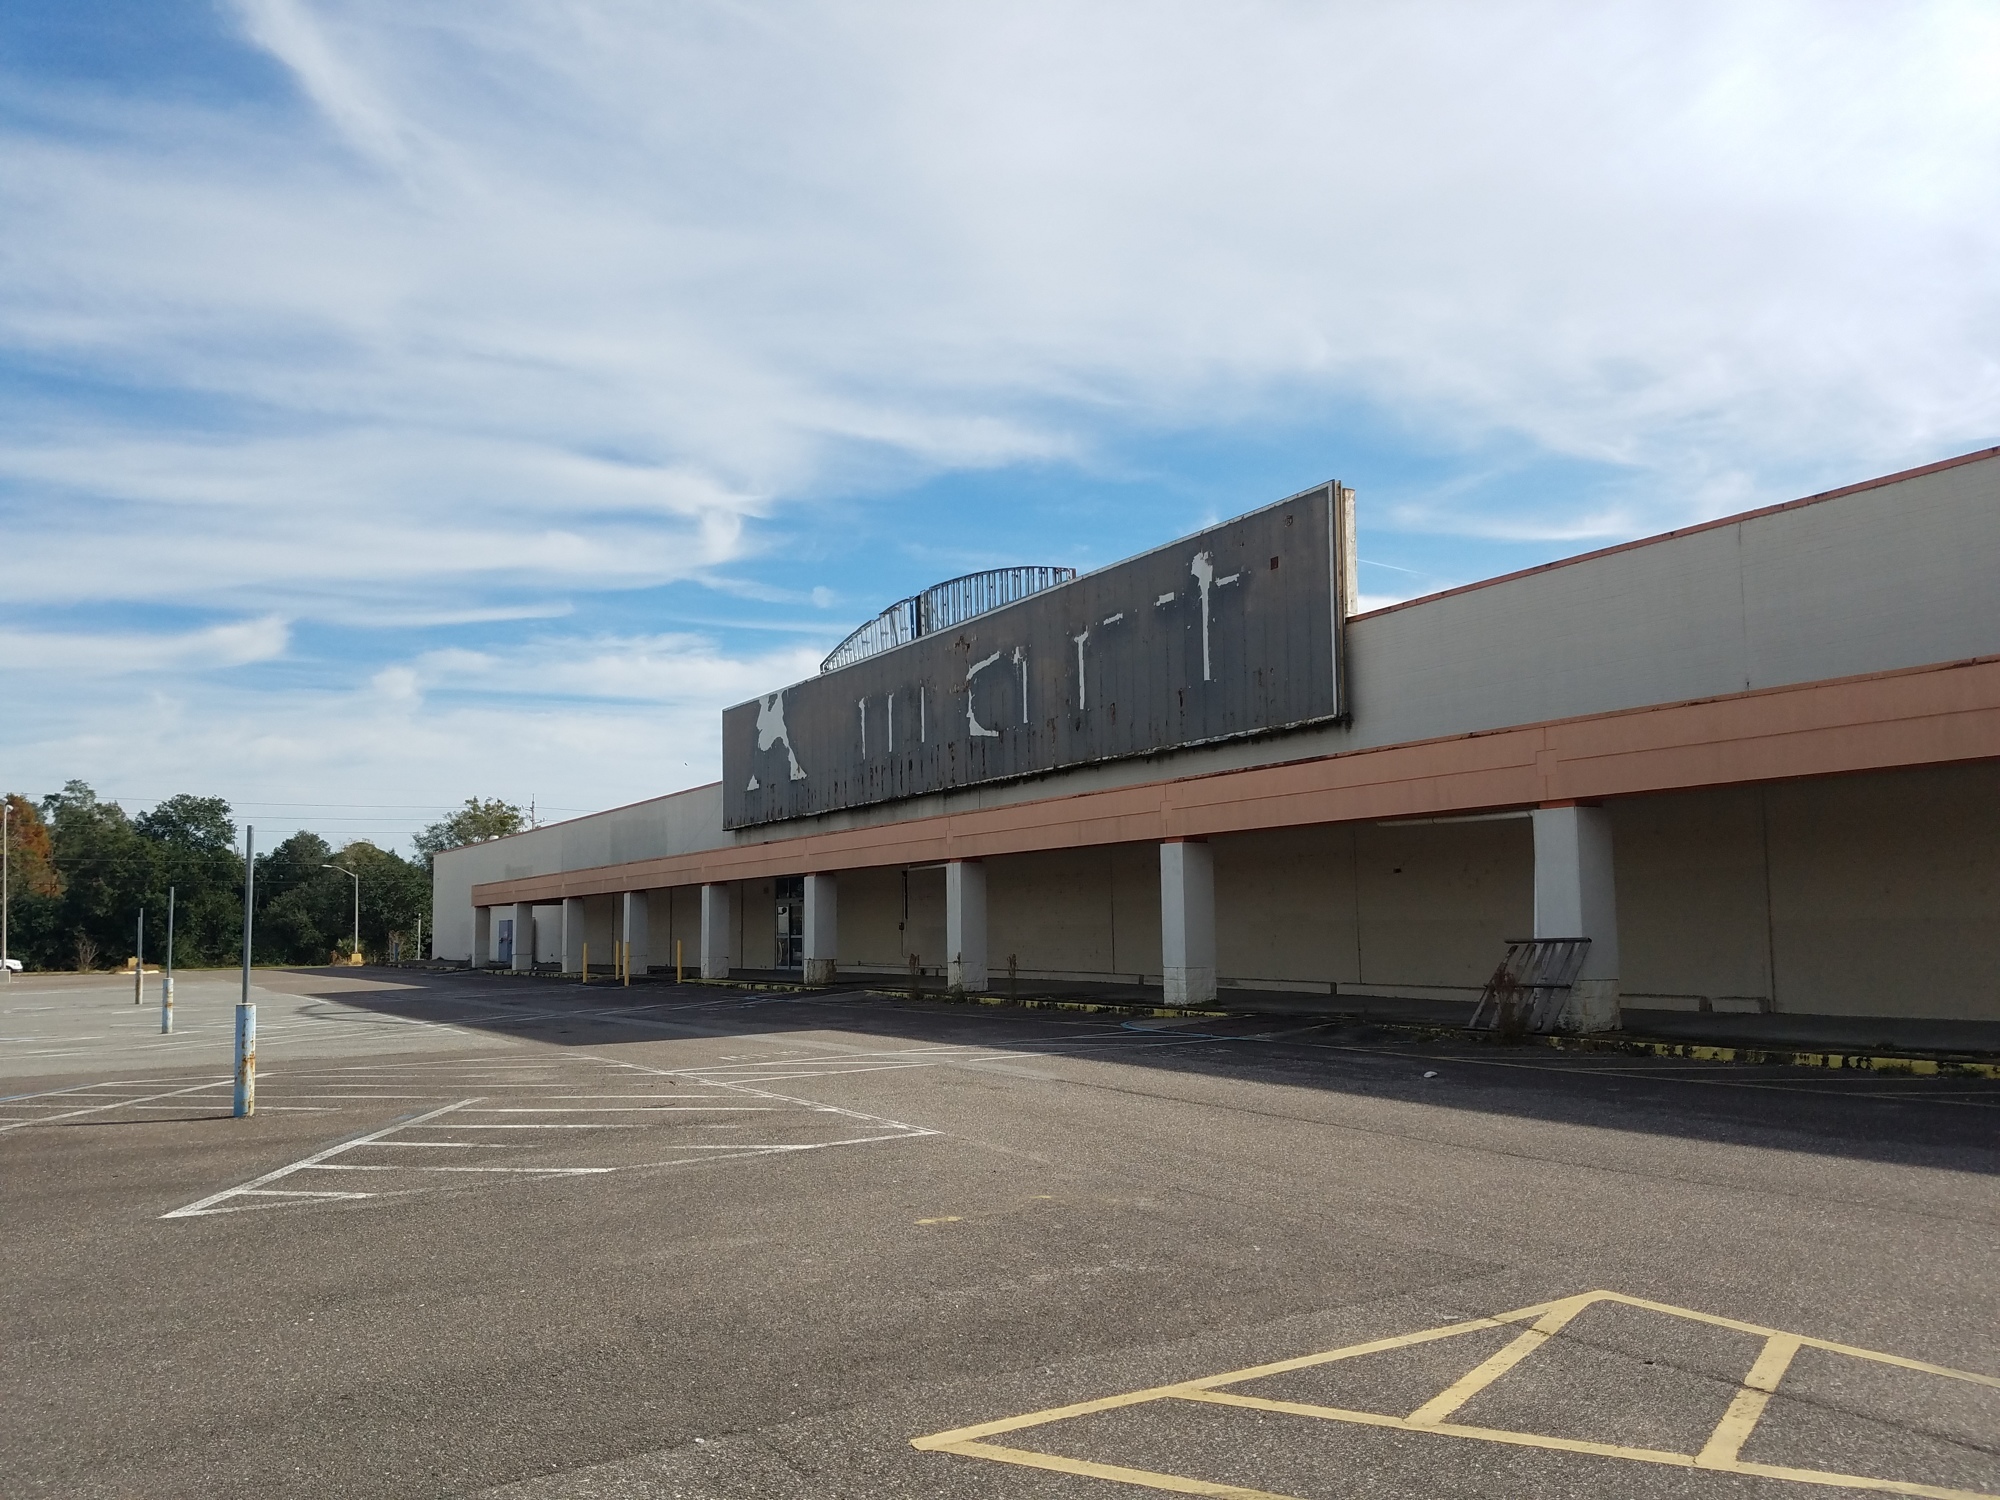 Internet retailer Amazon.com is converting a former Kmart at 4645 Blanding Blvd. into a last-mile fulfillment delivery center.